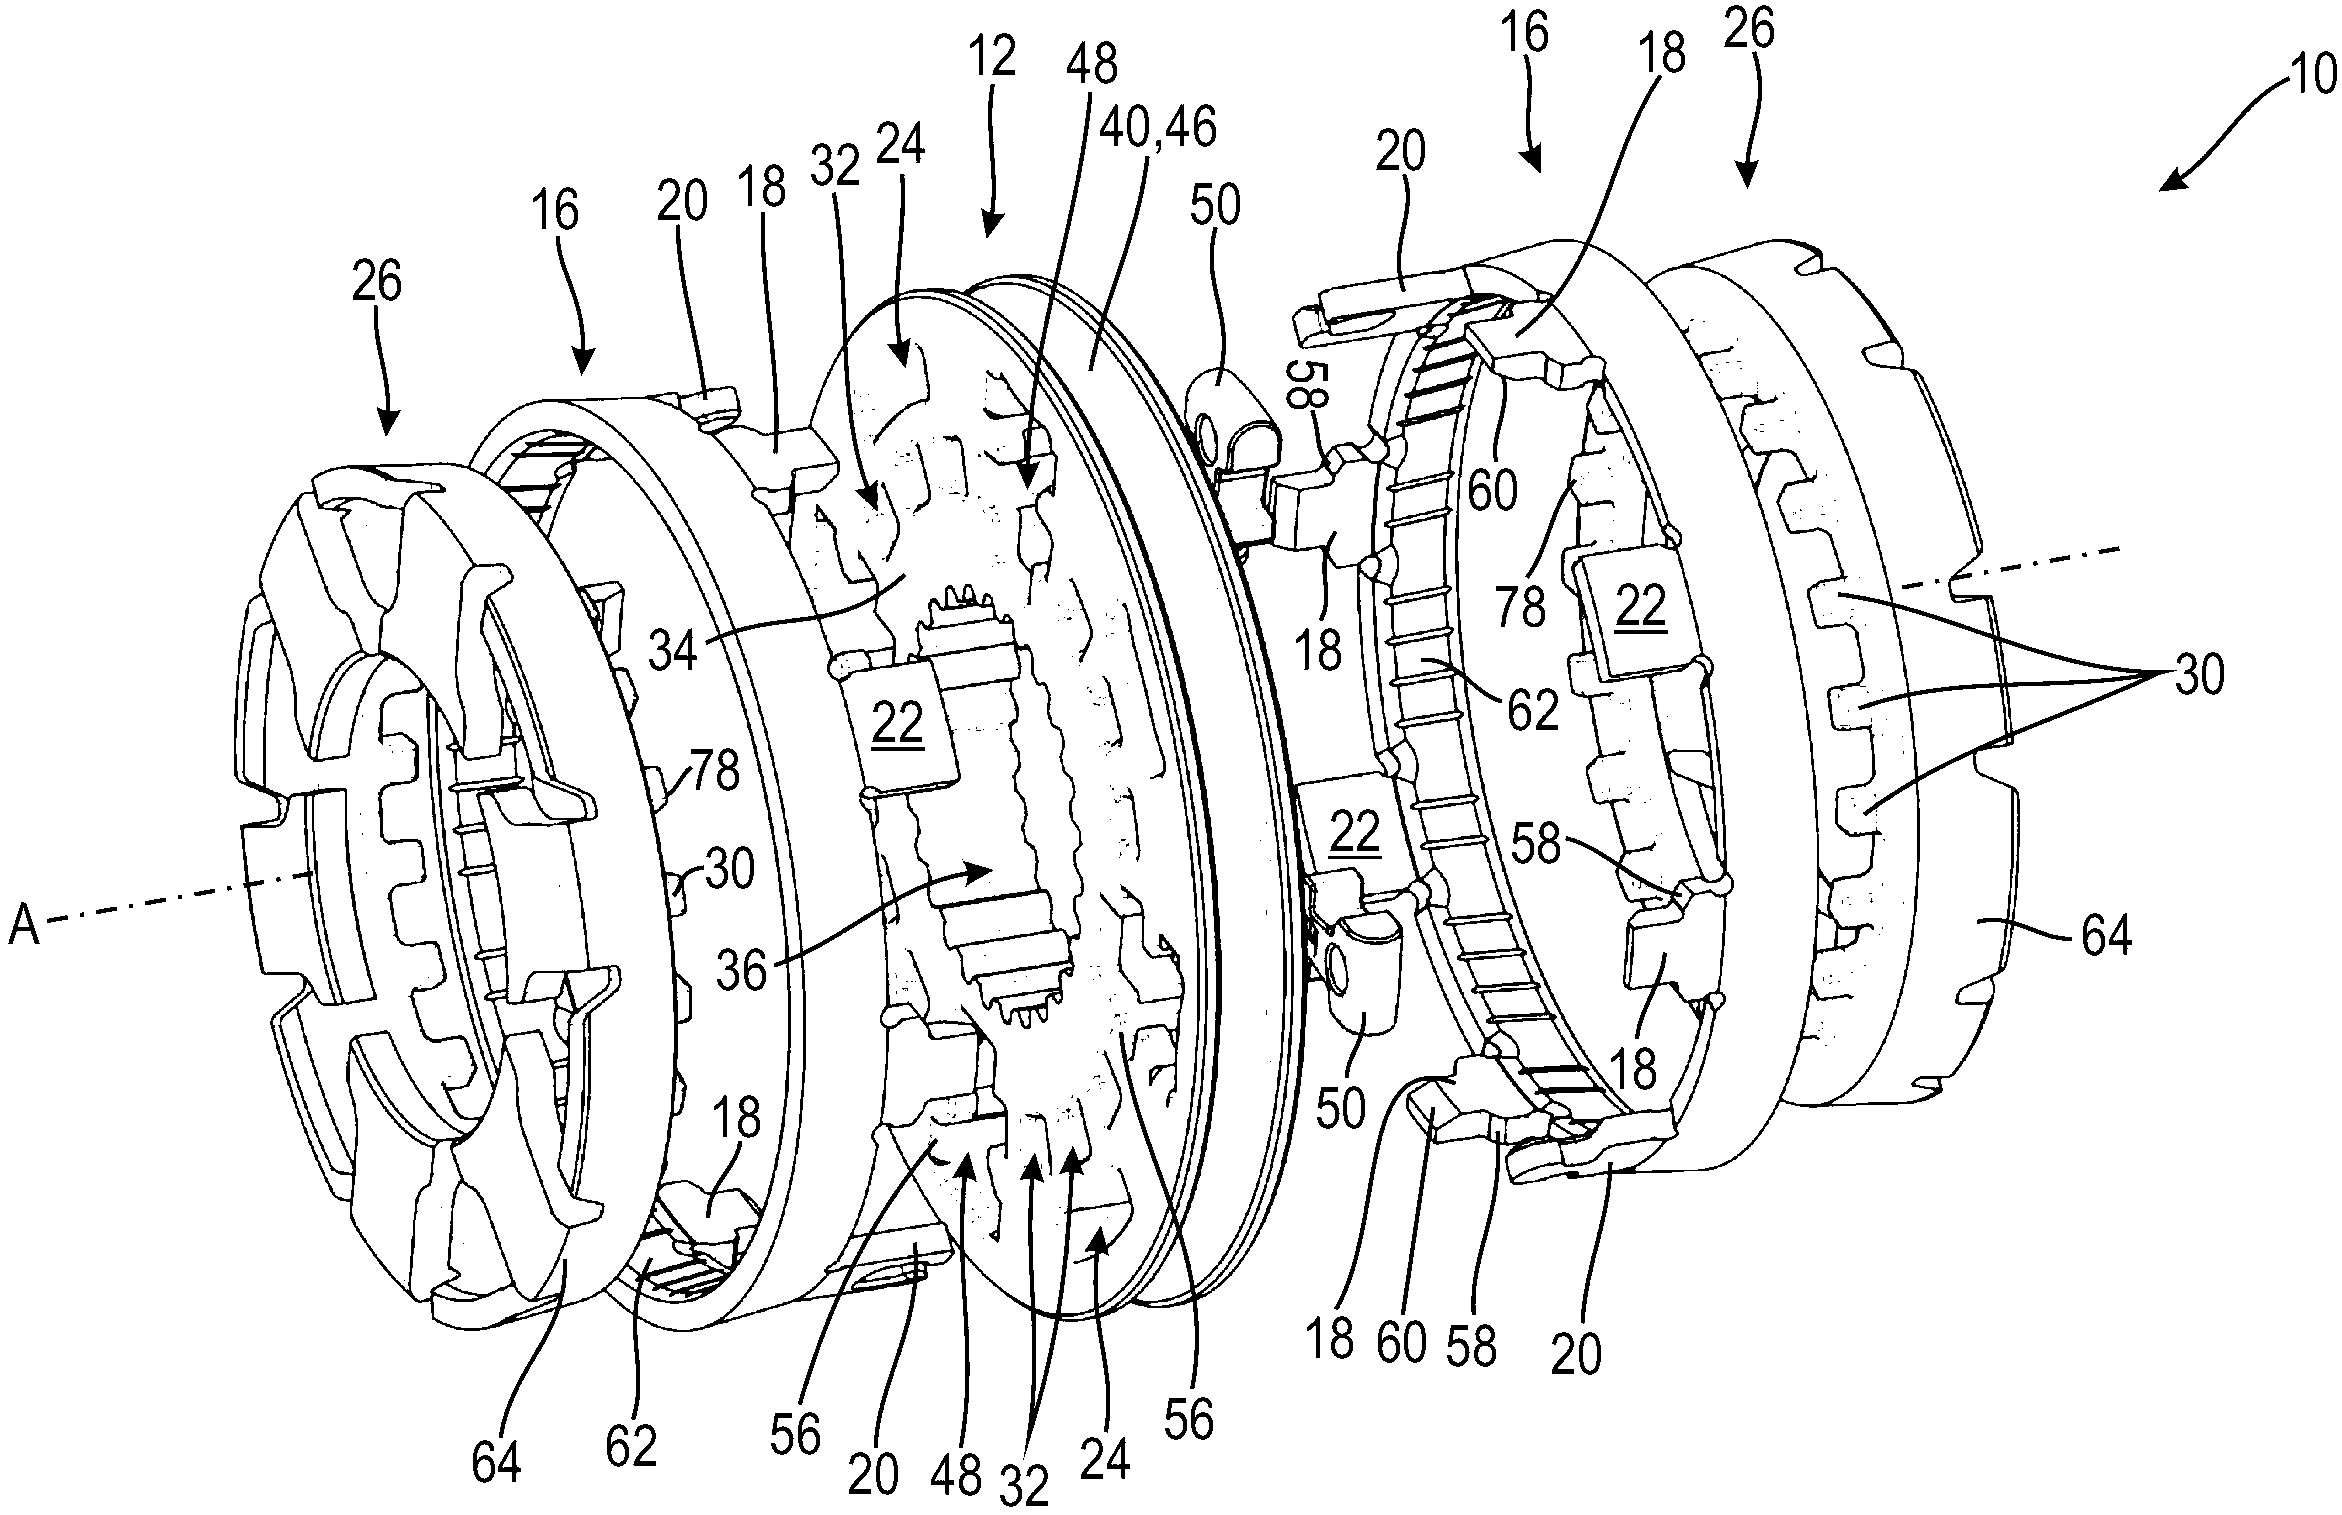 A shift gear driver of a flywheel synchronous transmission